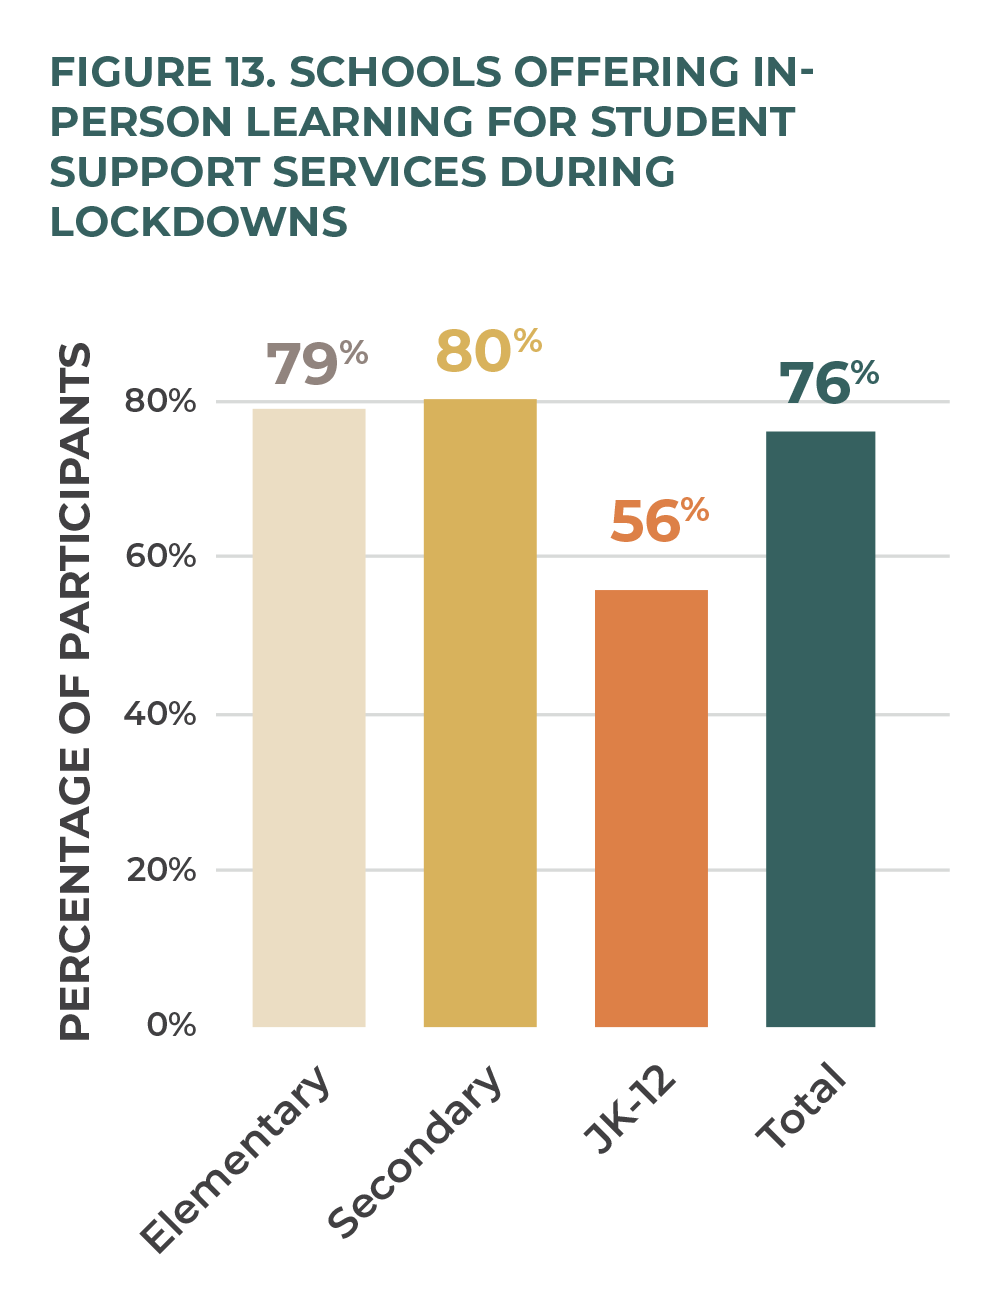 Figure 13. Schools Offering In-Person Learning for Student Support Services During Lockdowns.